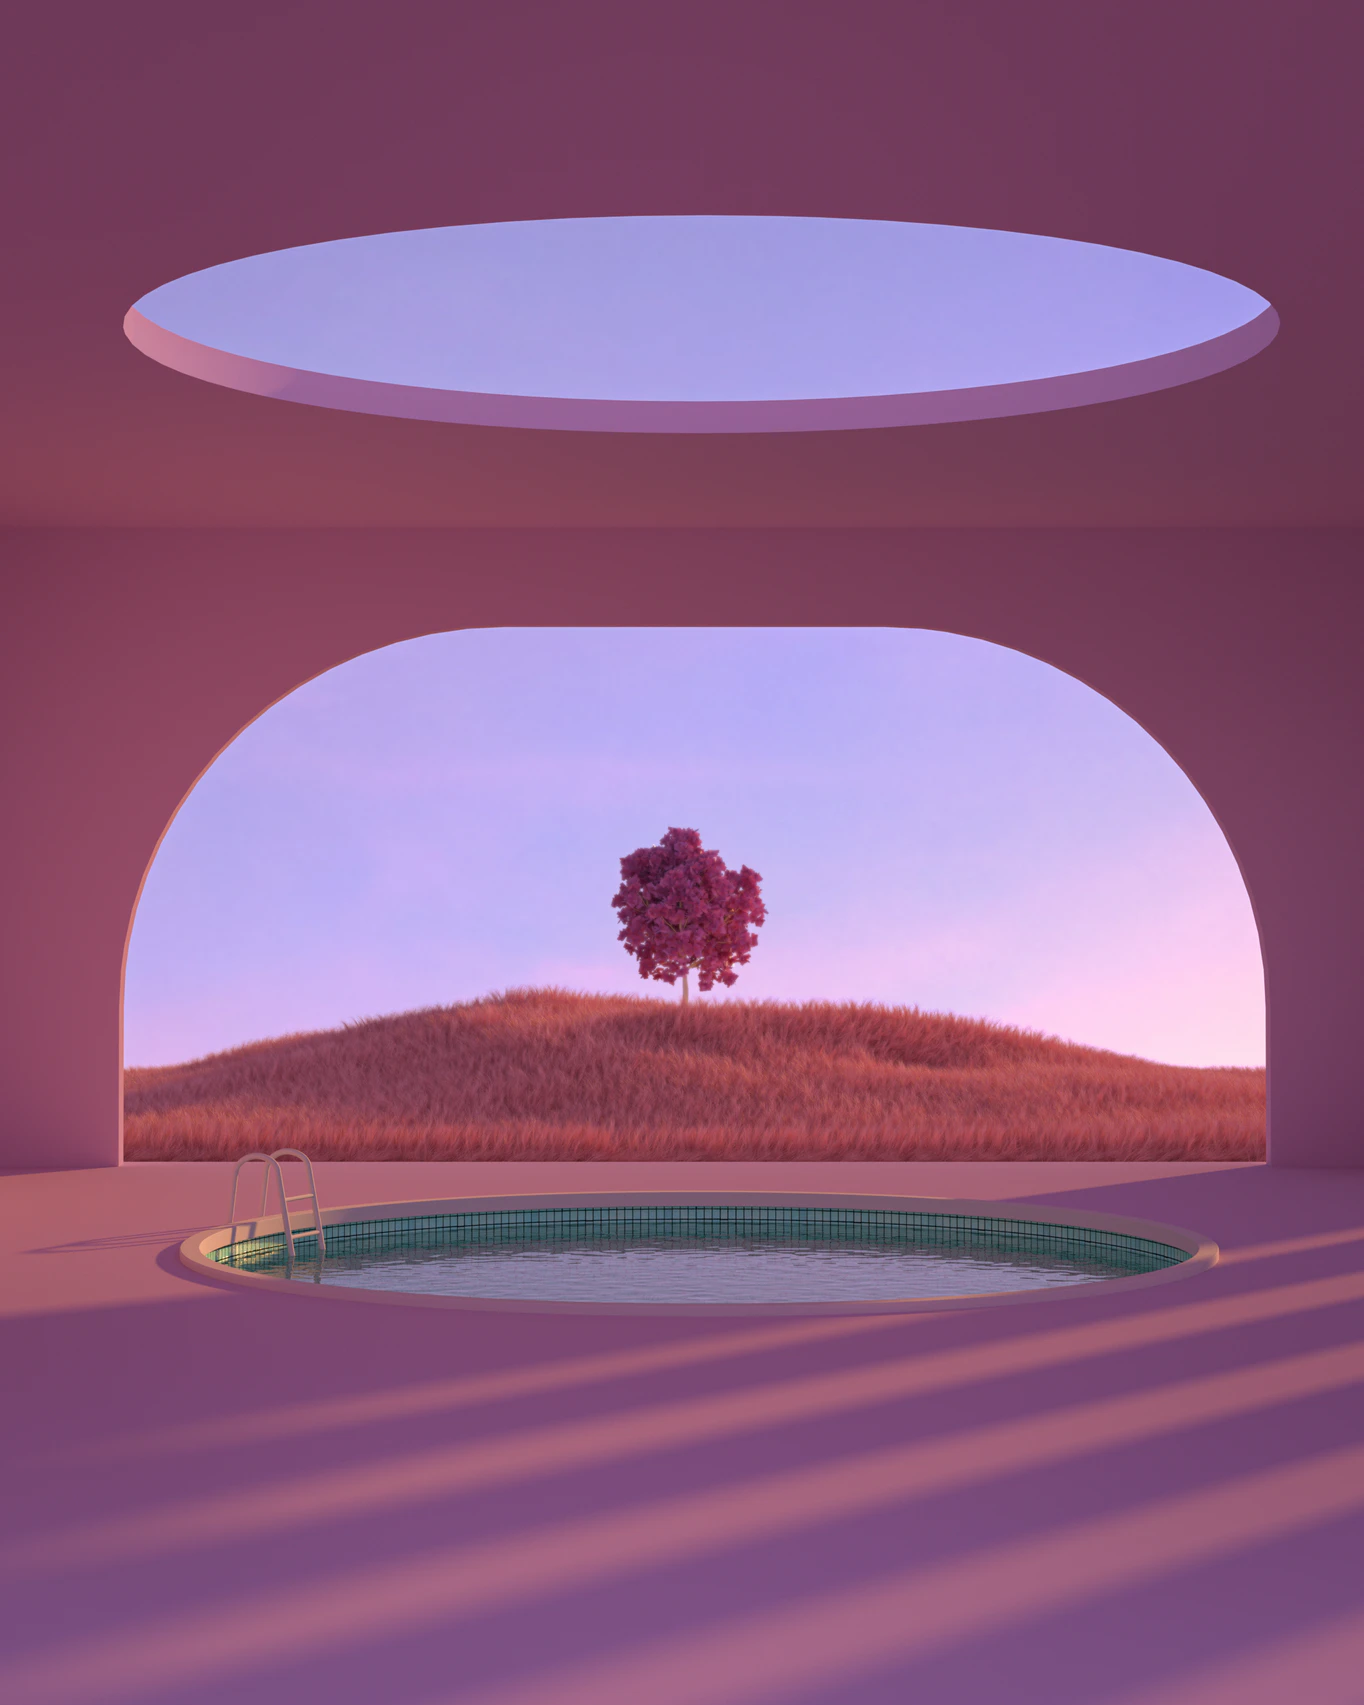 A swimming pool in a room. Through a large opening in the wall behind the pool is a hill with pink grass and a pink tree.